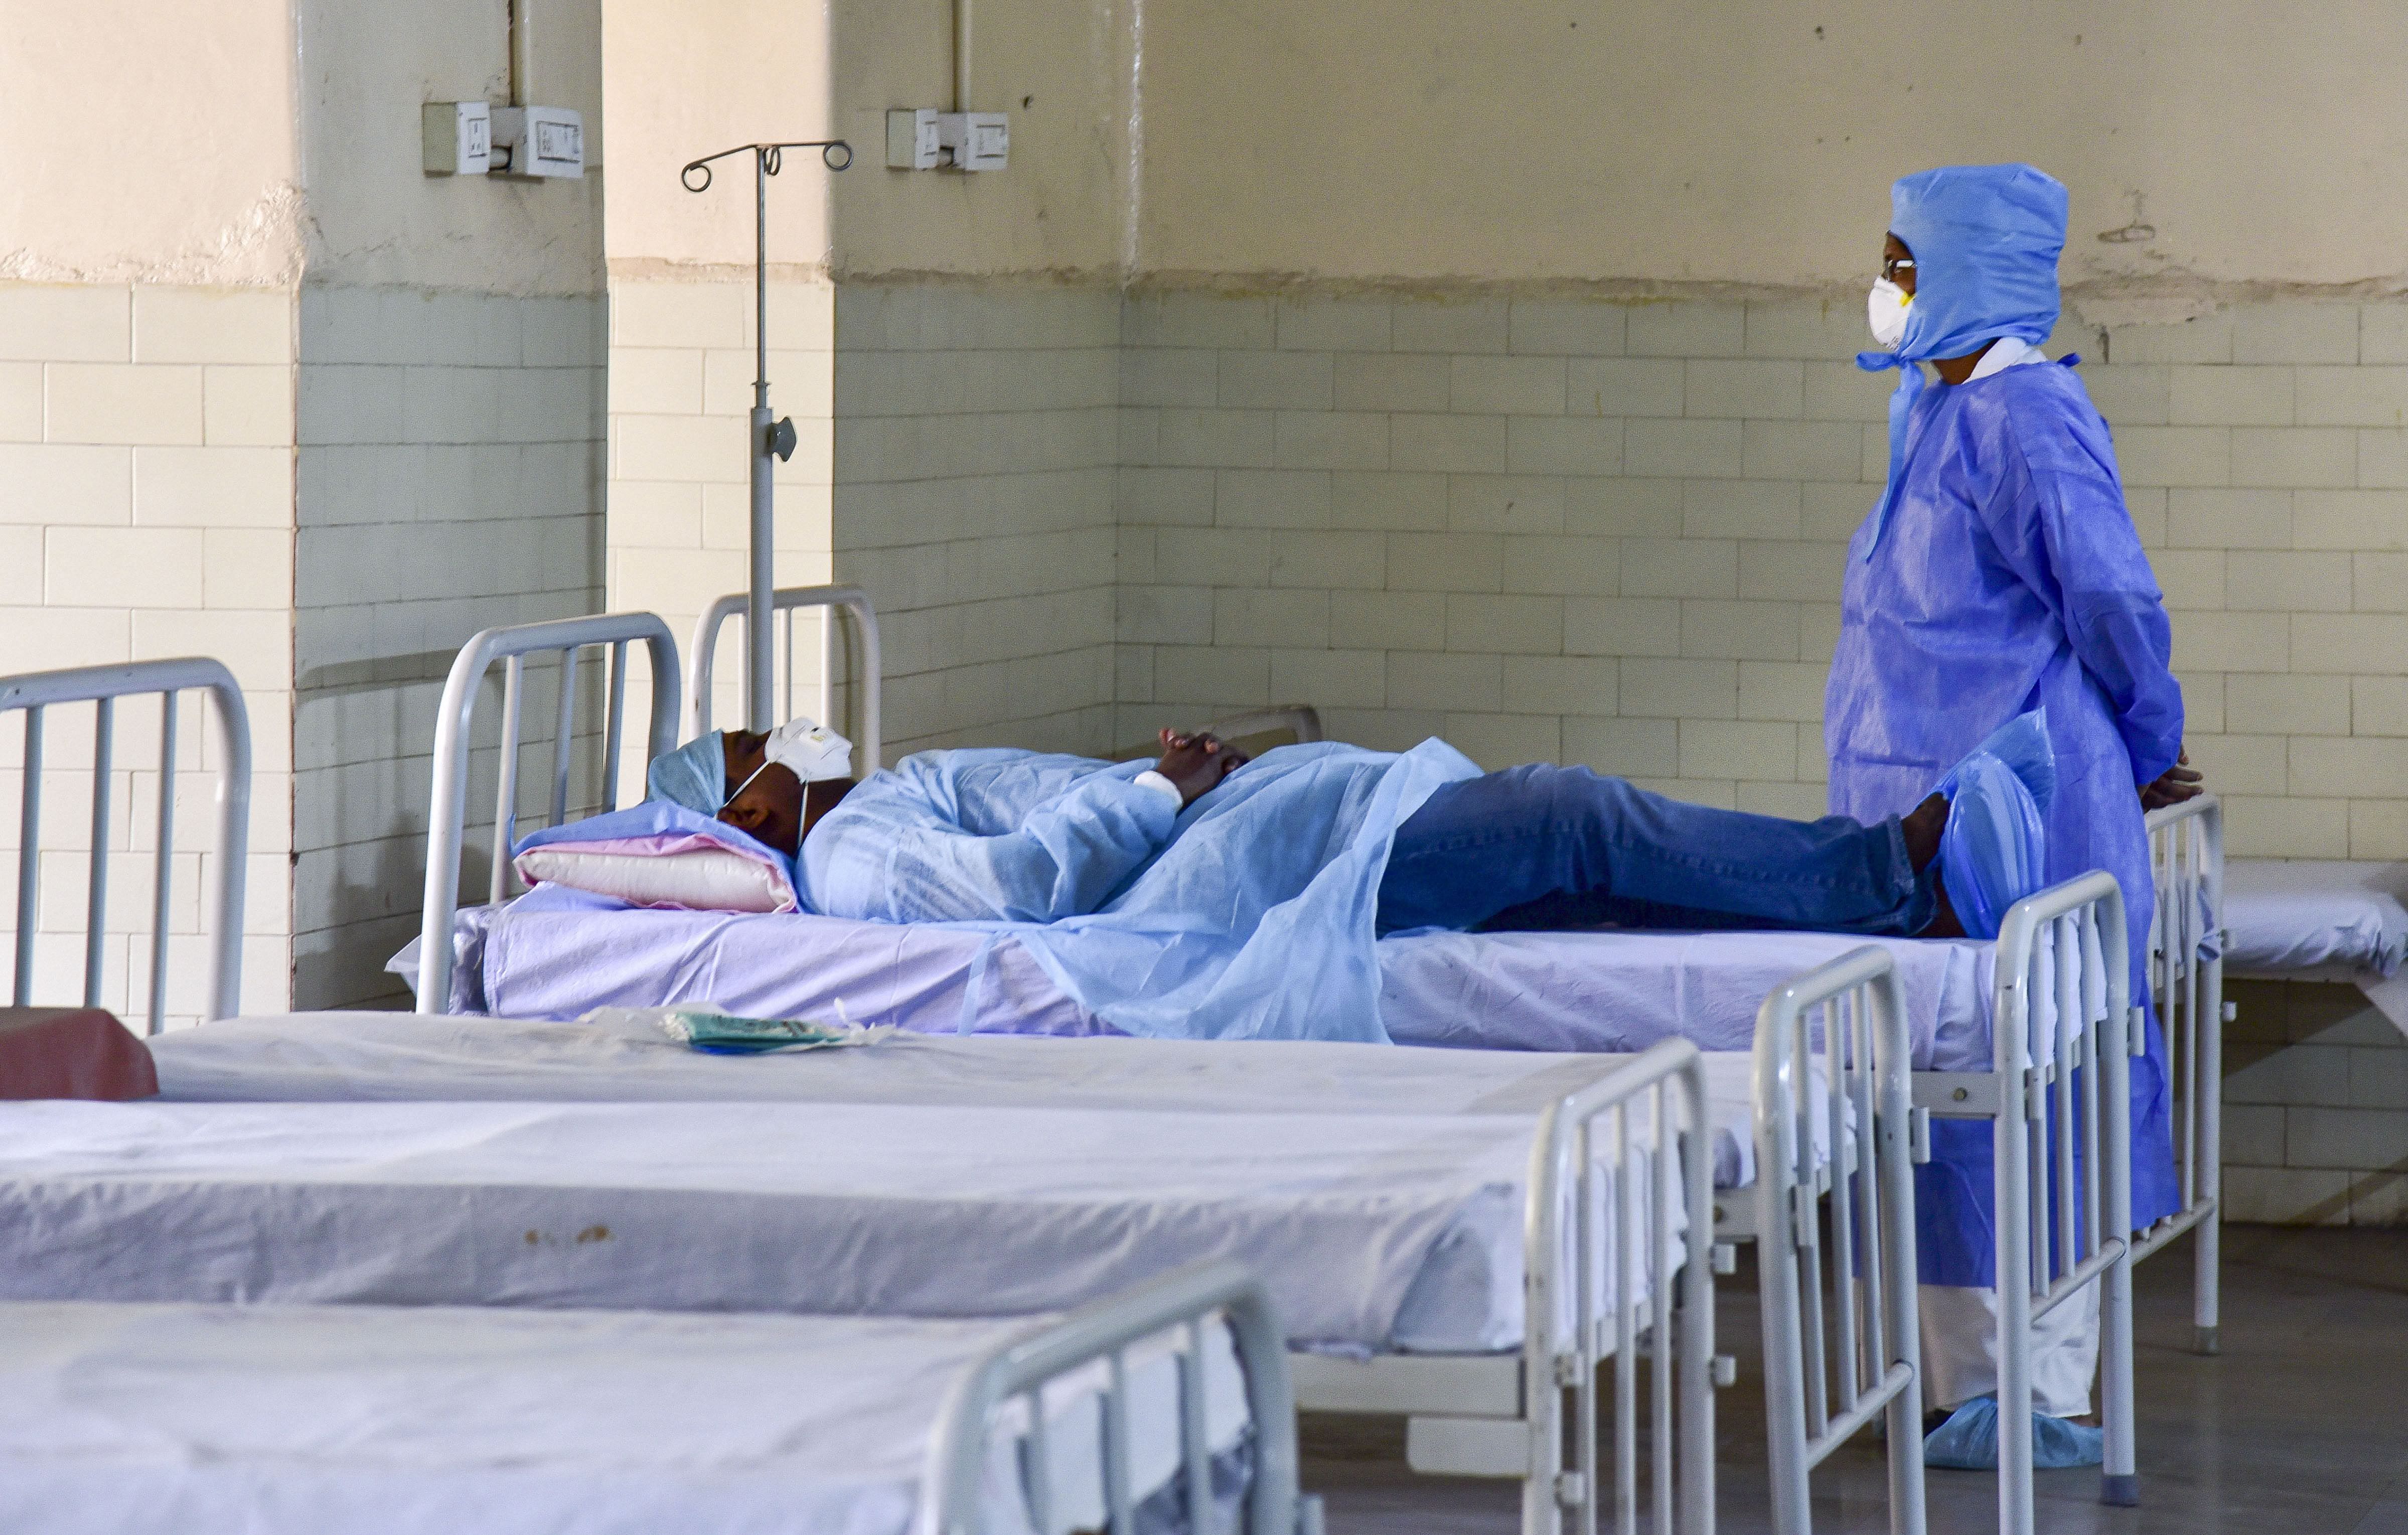 Hyderabad: A medic looks on at a patient who has shown positive symptoms for coronavirus (COVID -19) at an isolation ward in Hyderabad, Tuesday, March 10, 2020. (Credit: PTI Photo)